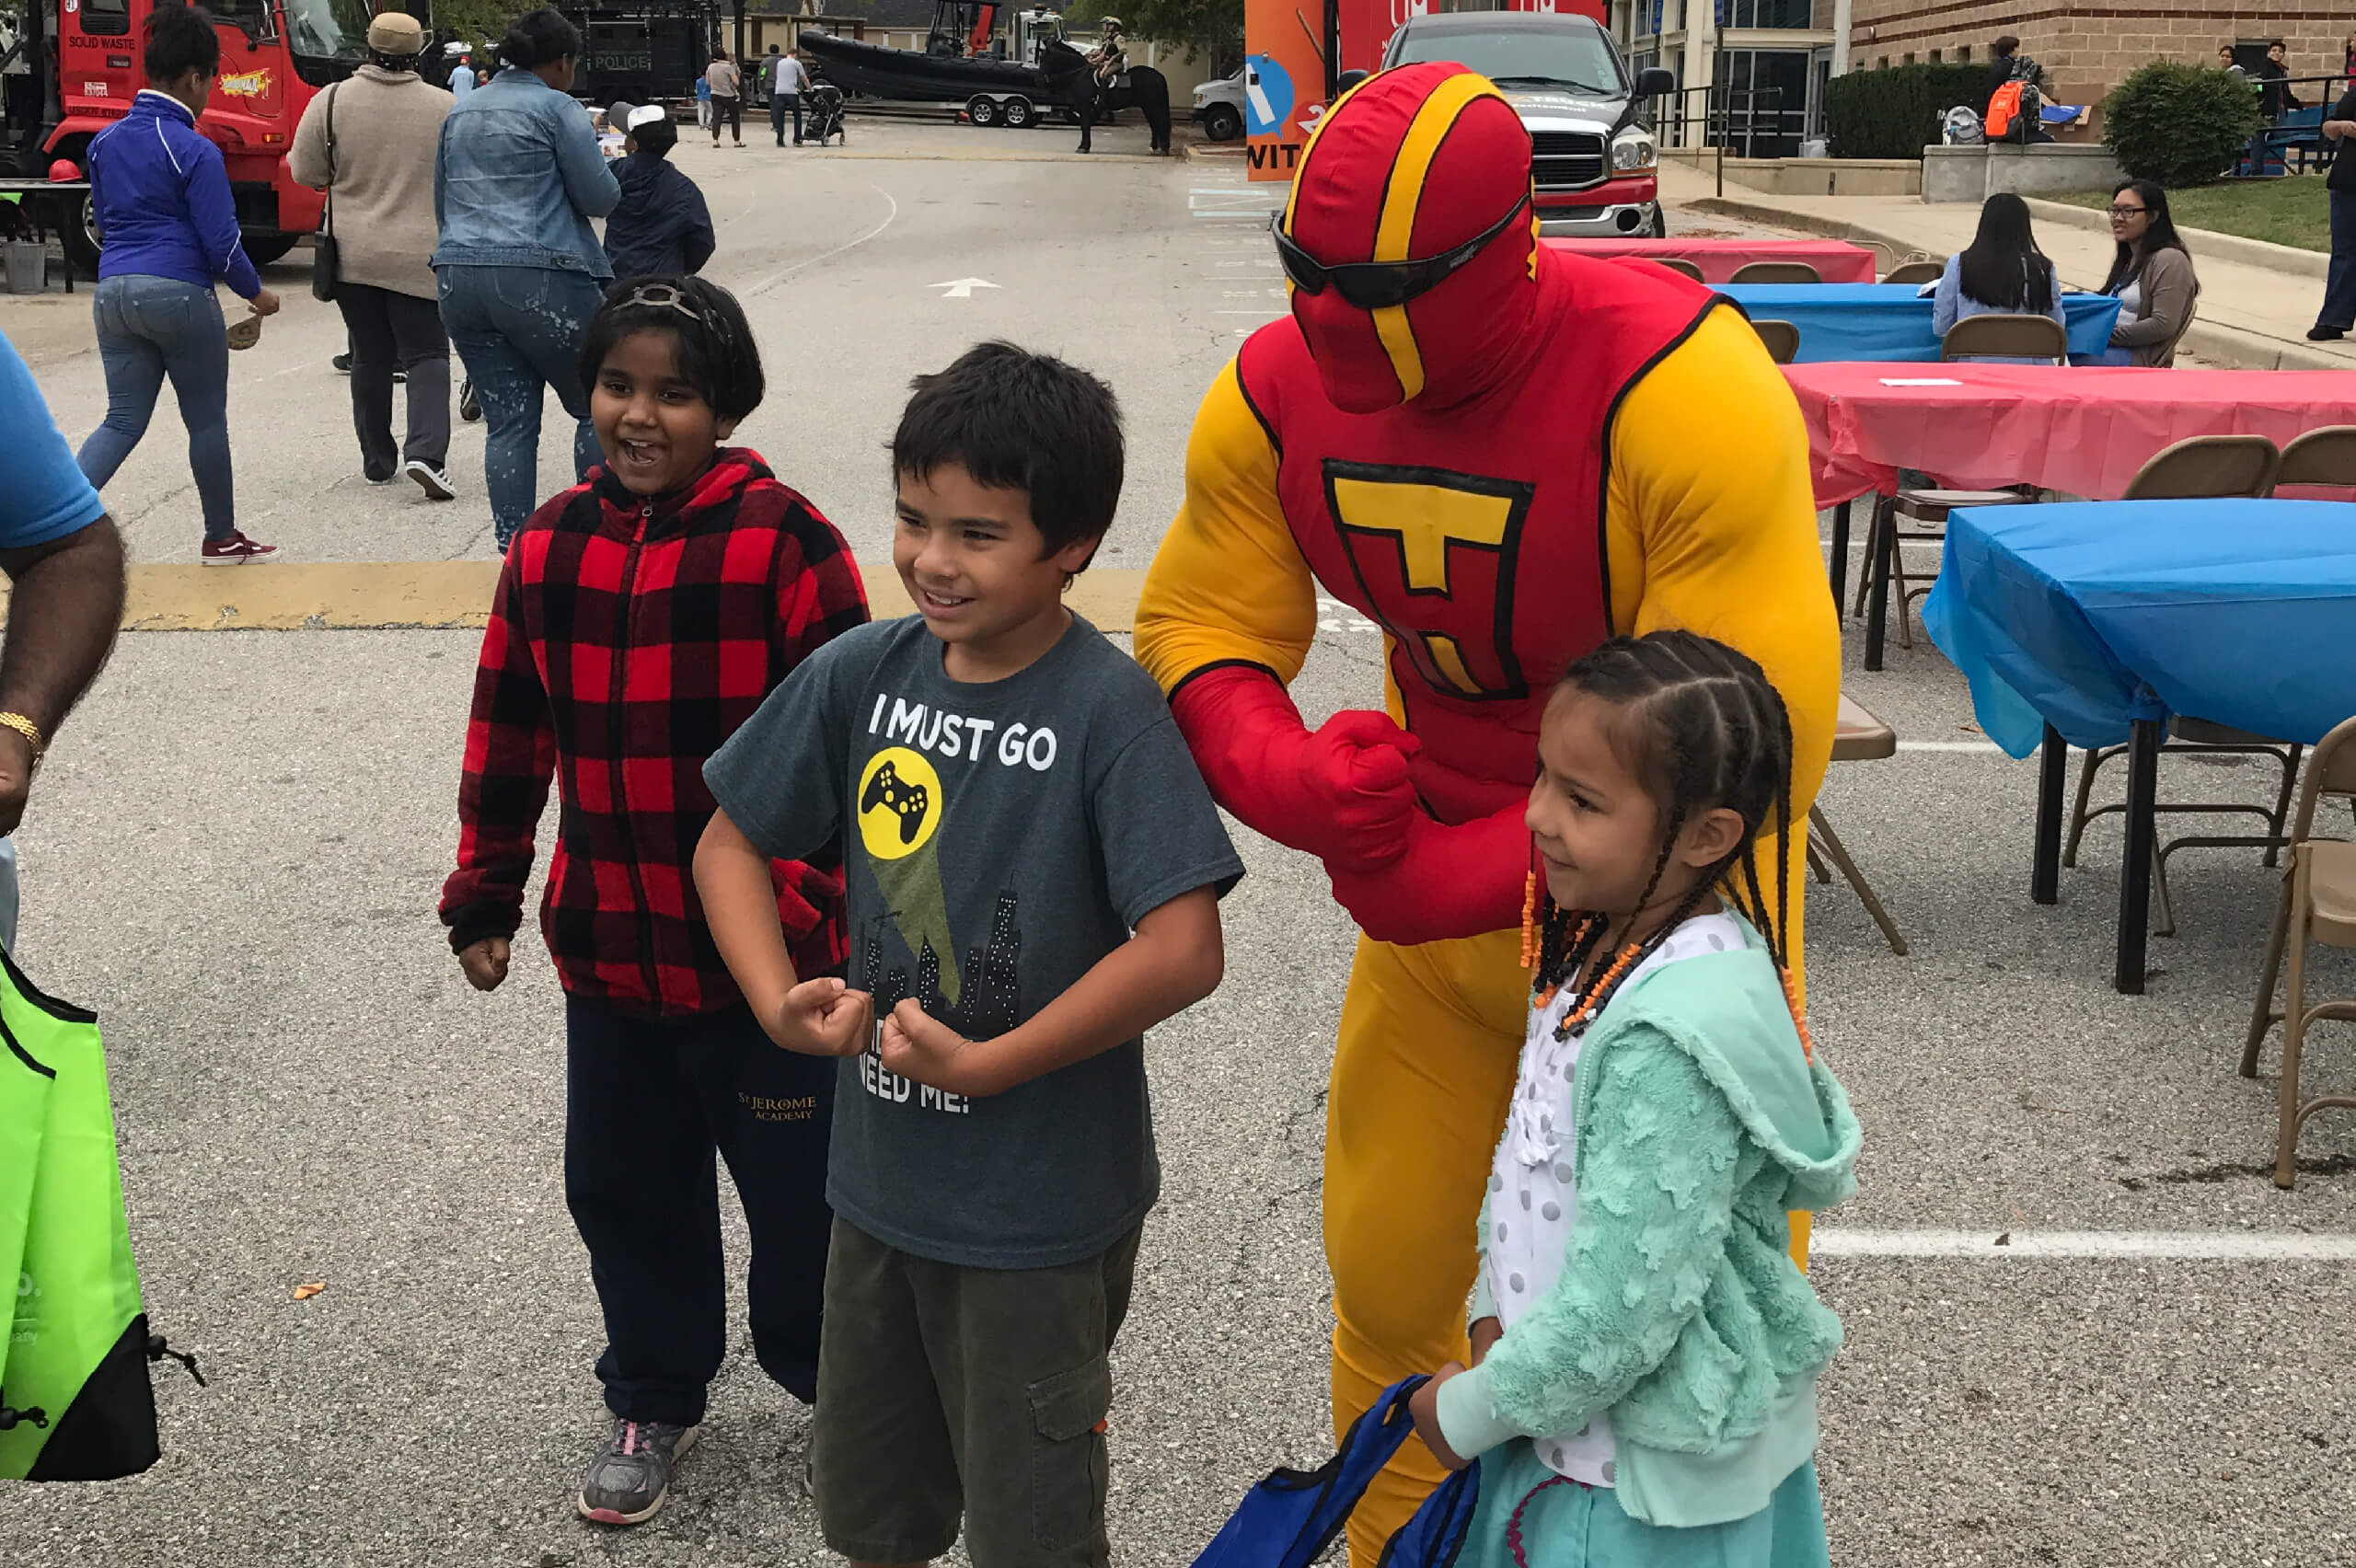 TurboHaul Man flexes his muscles with kids in Laurel, MD